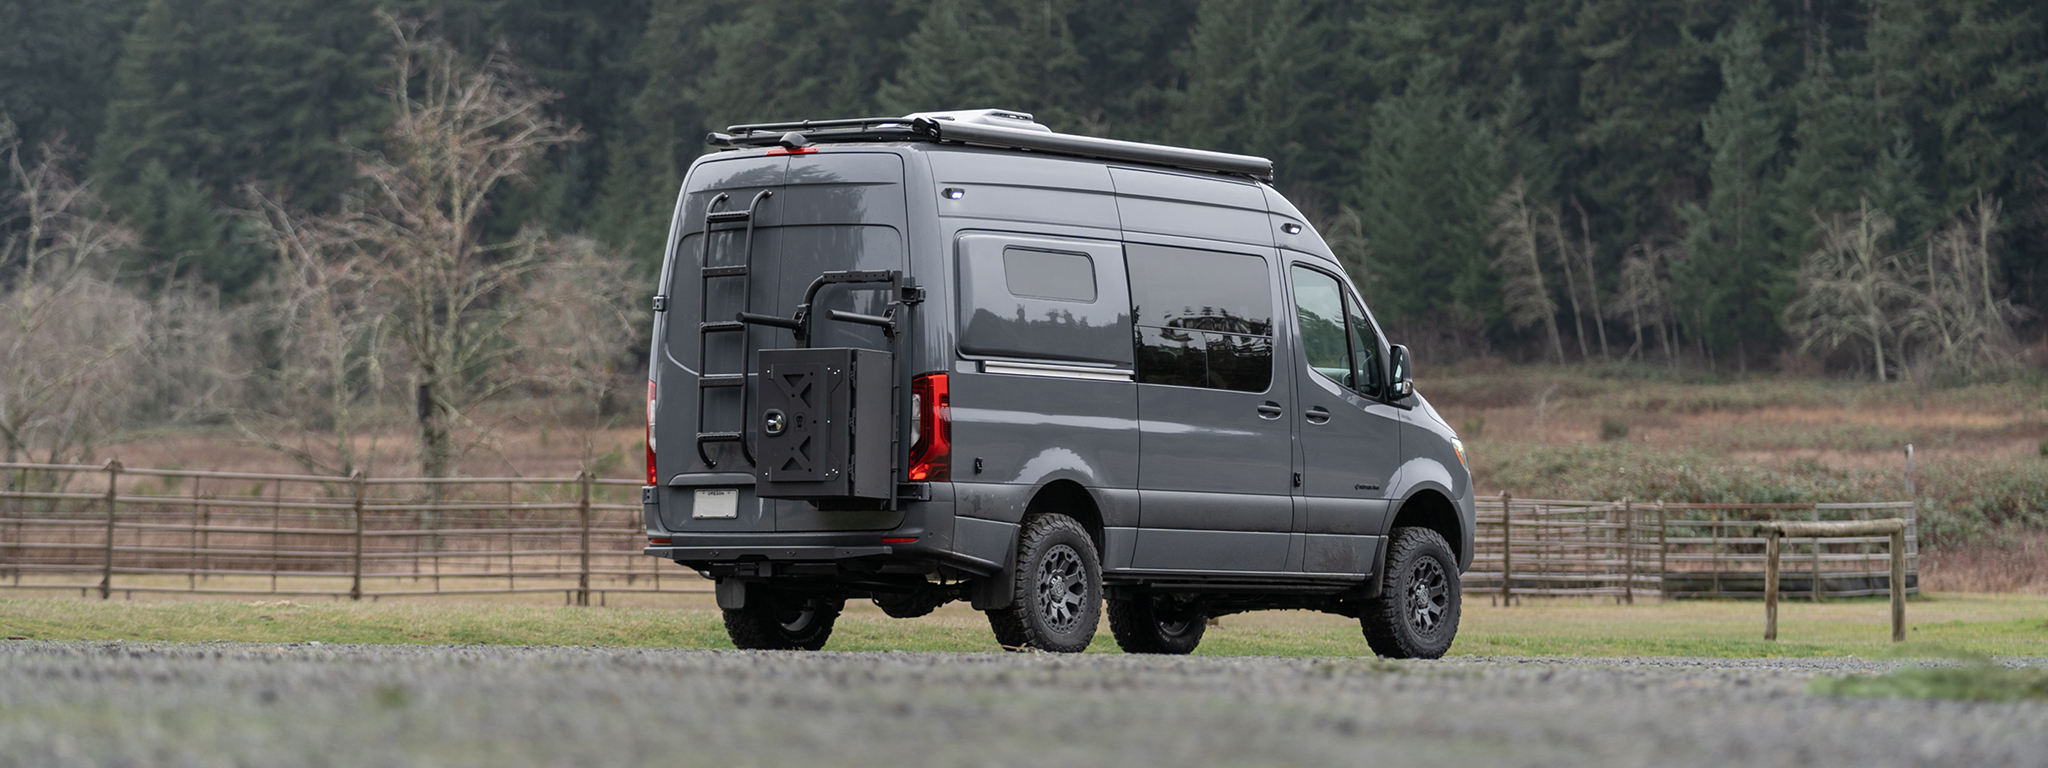 Grey van in a field with exterior metalwork on rear panels with a ladder, cargo box, and bike rack